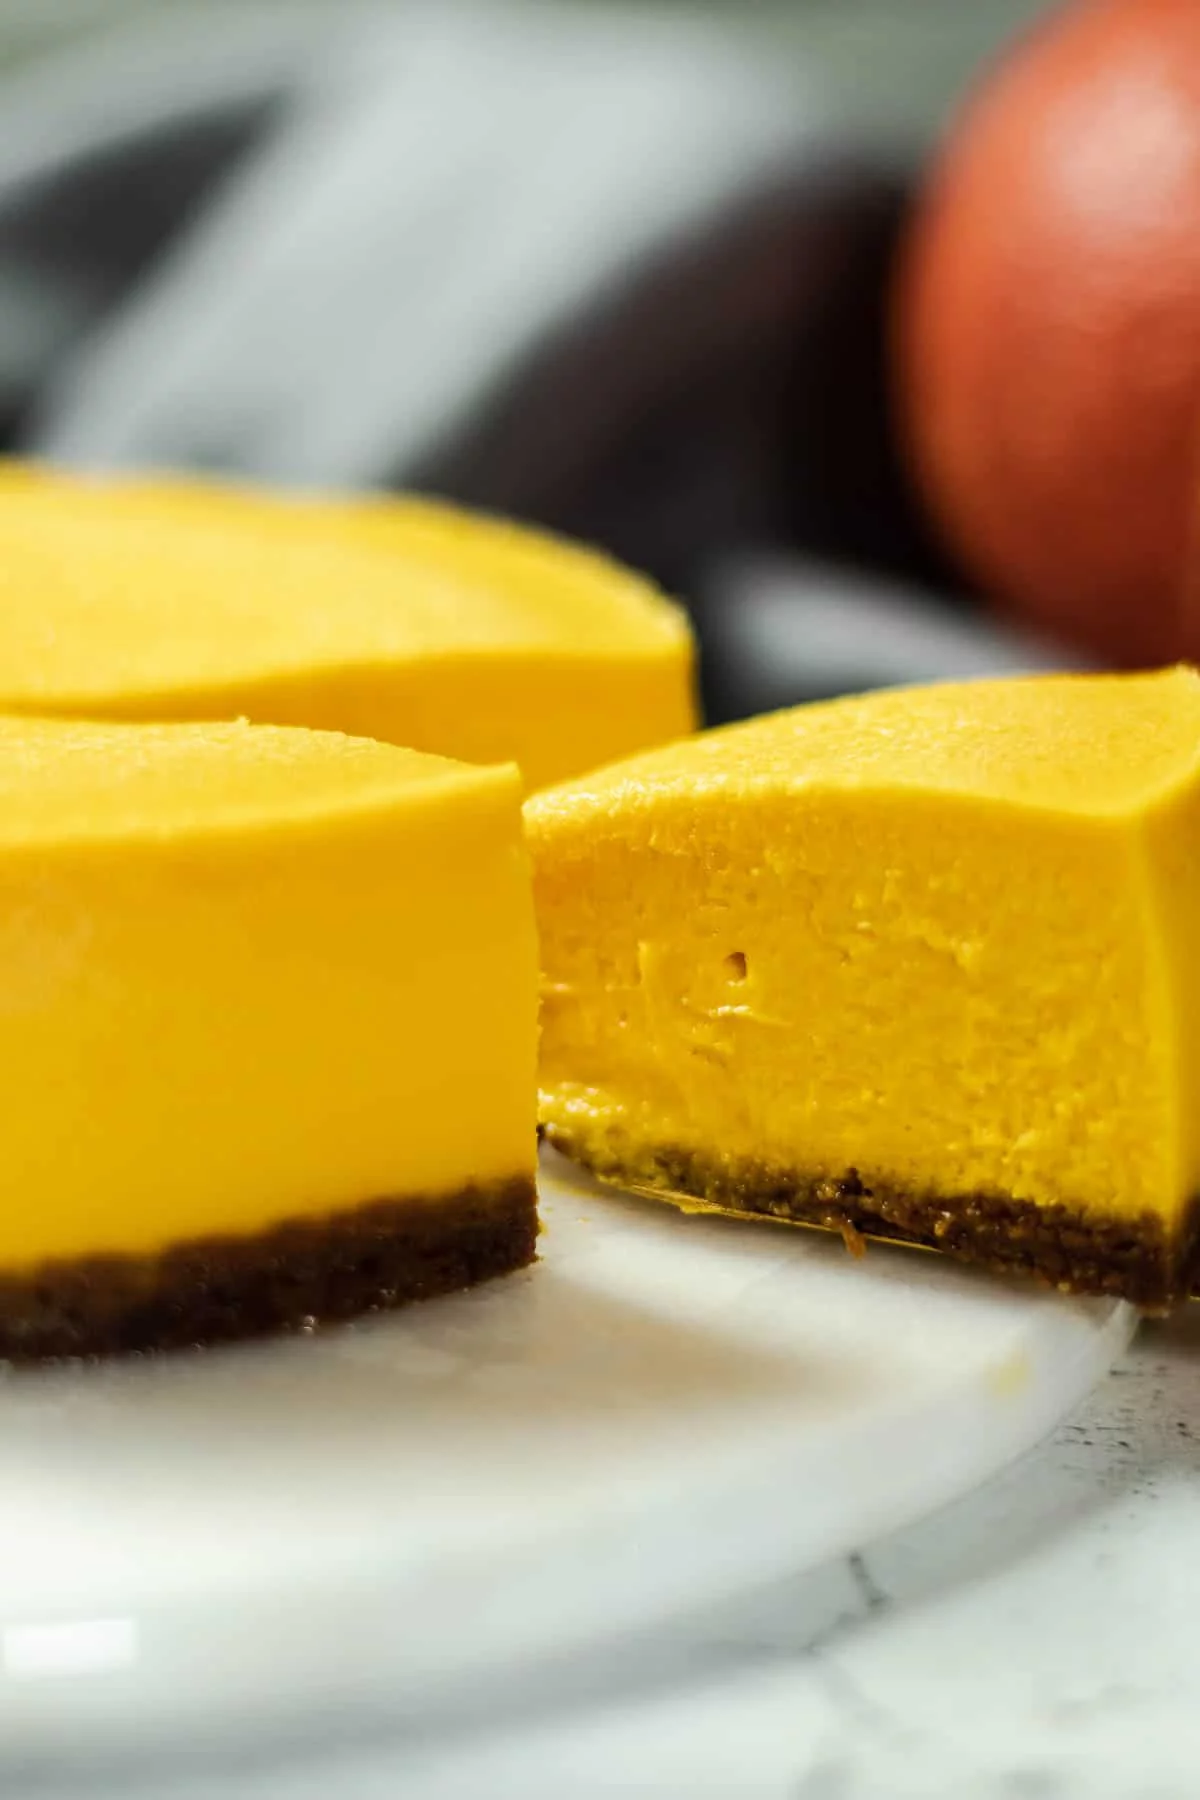 Rich and Creamy! Melted Pumpkin Cheesecake Recipe